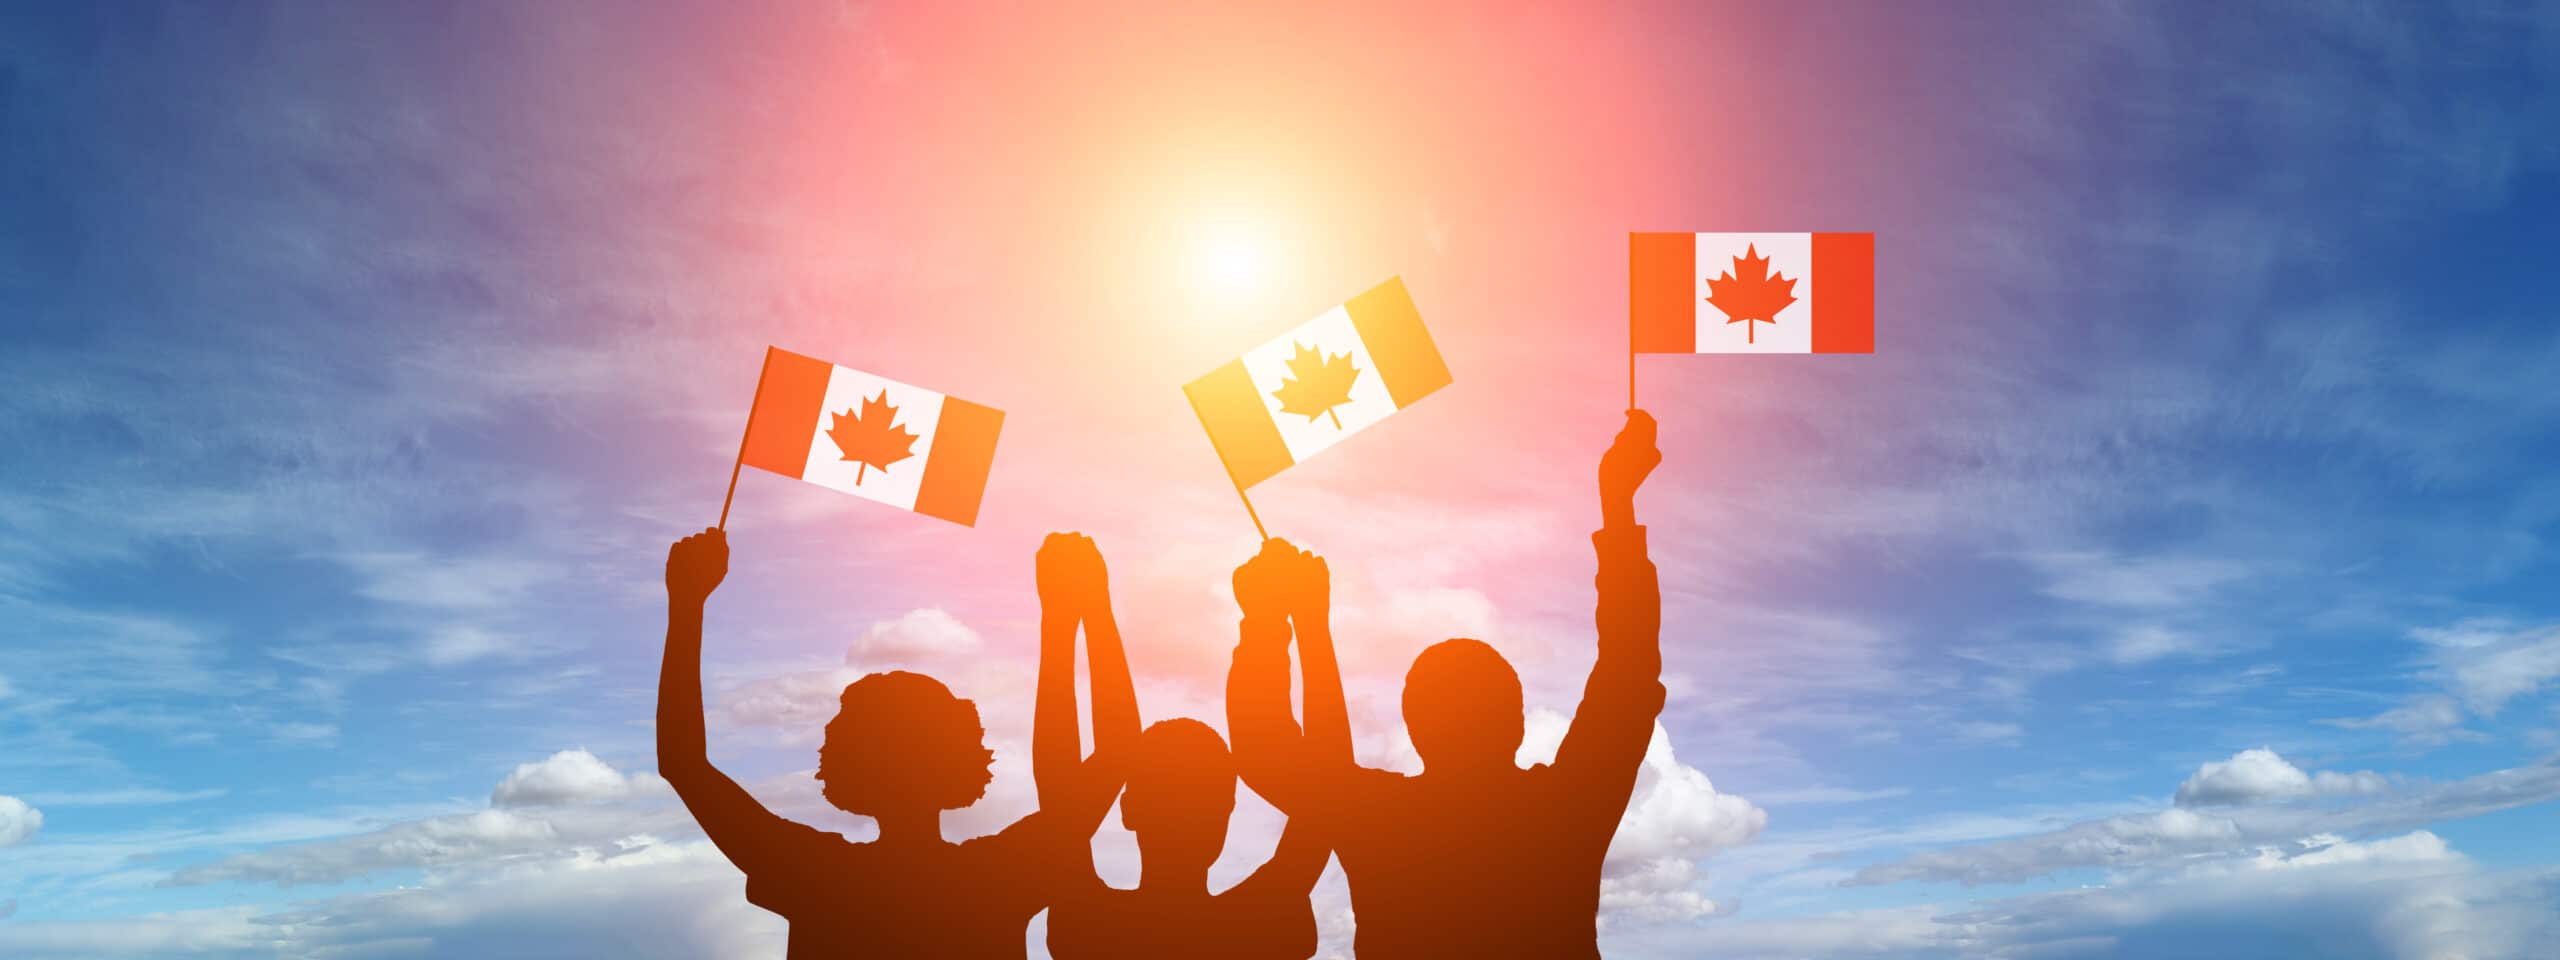 Three silhouetted figures waving Canadian flags. They are standing against a blue sky with clouds.